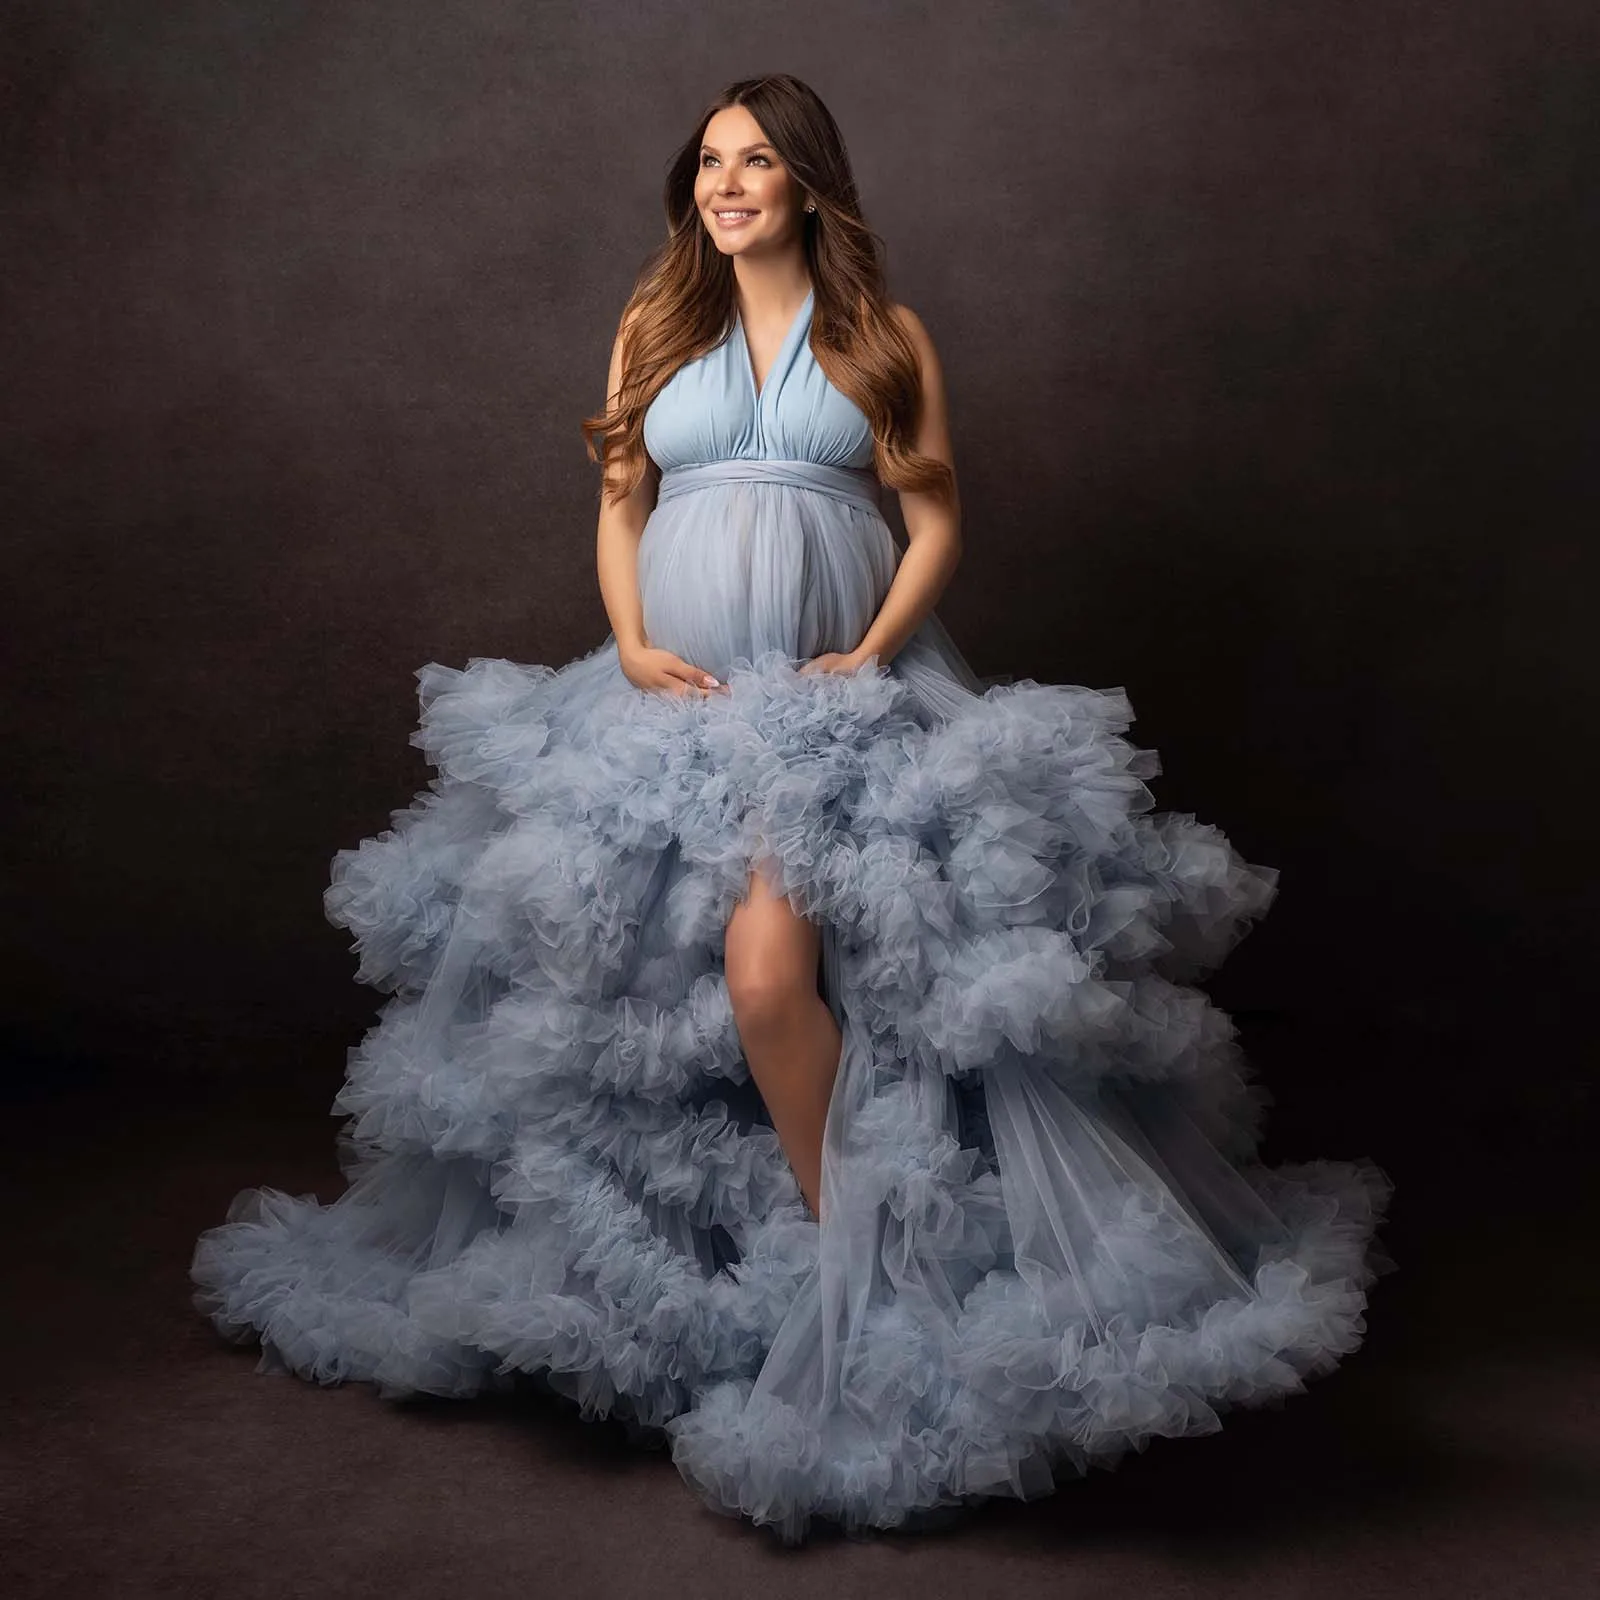 

Modest Blue Ruffled Tulle Maternity Dress For Photo Shoot Baby Shower A-line Long Bridal Tulle Robe Pregnancy Photoshoots Dress